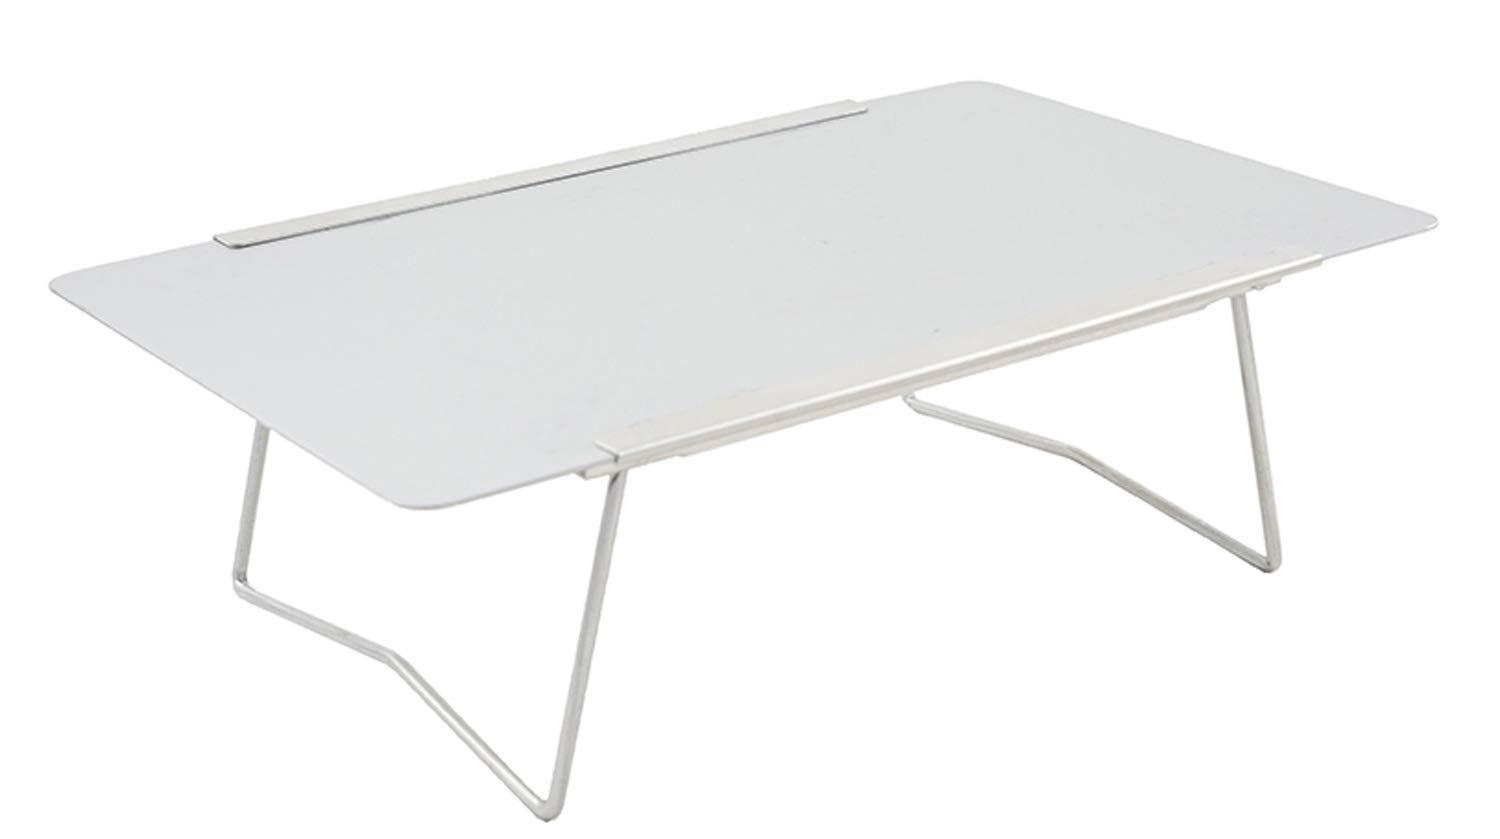 Alu Table/ Fire i:EBY531 EVERNEW